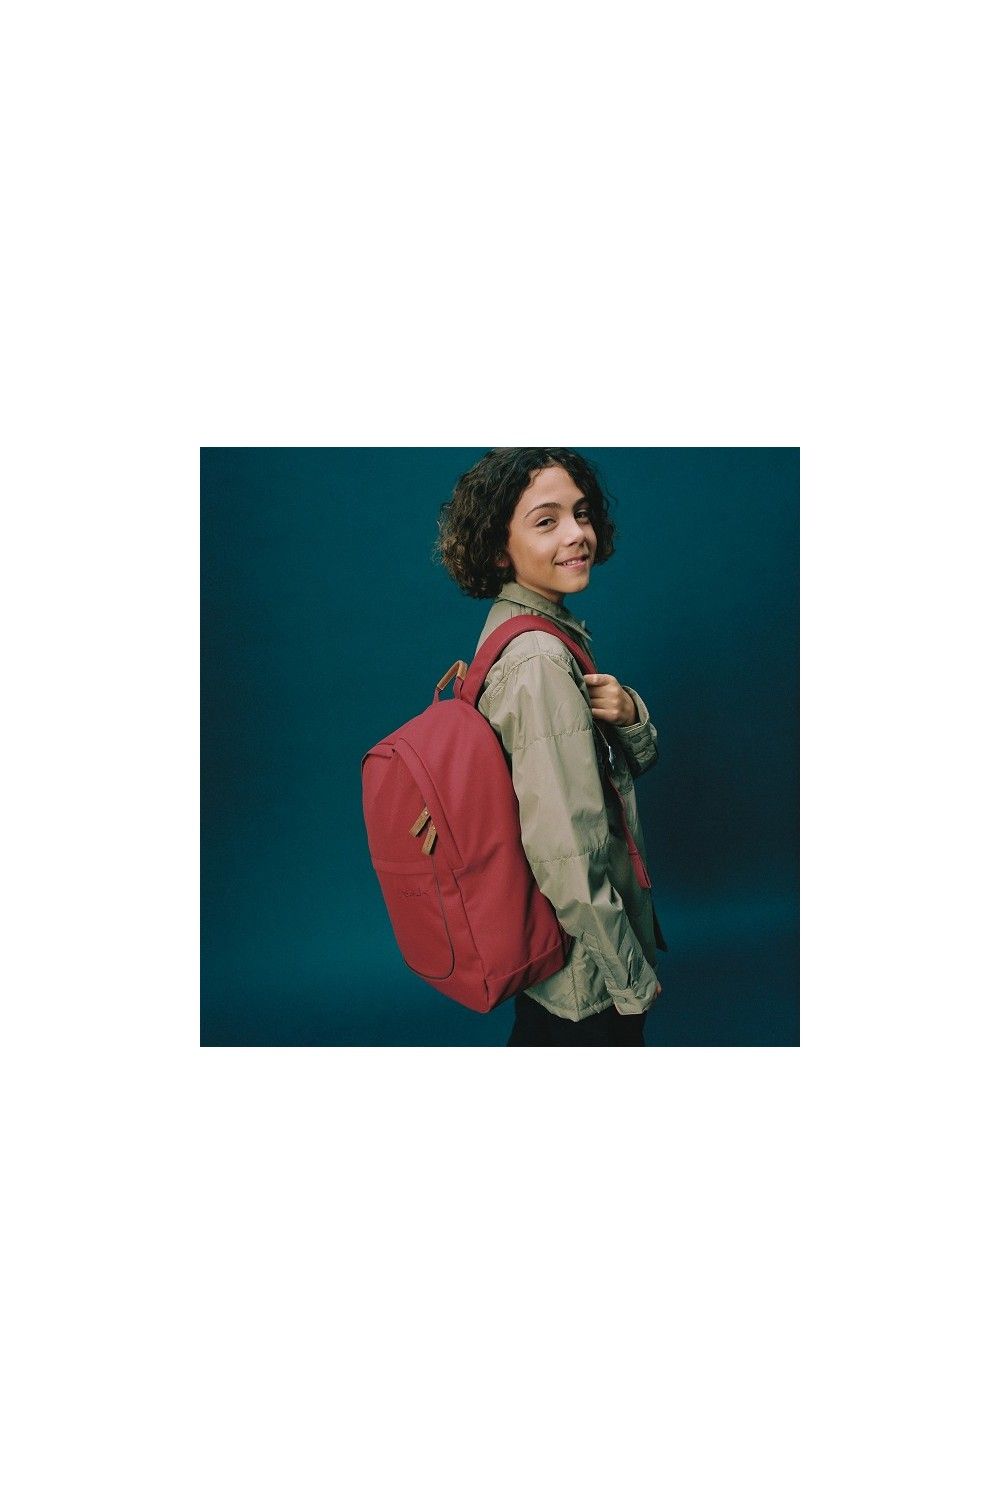 Sac à dos scolaire Satch Fly Nordic Red